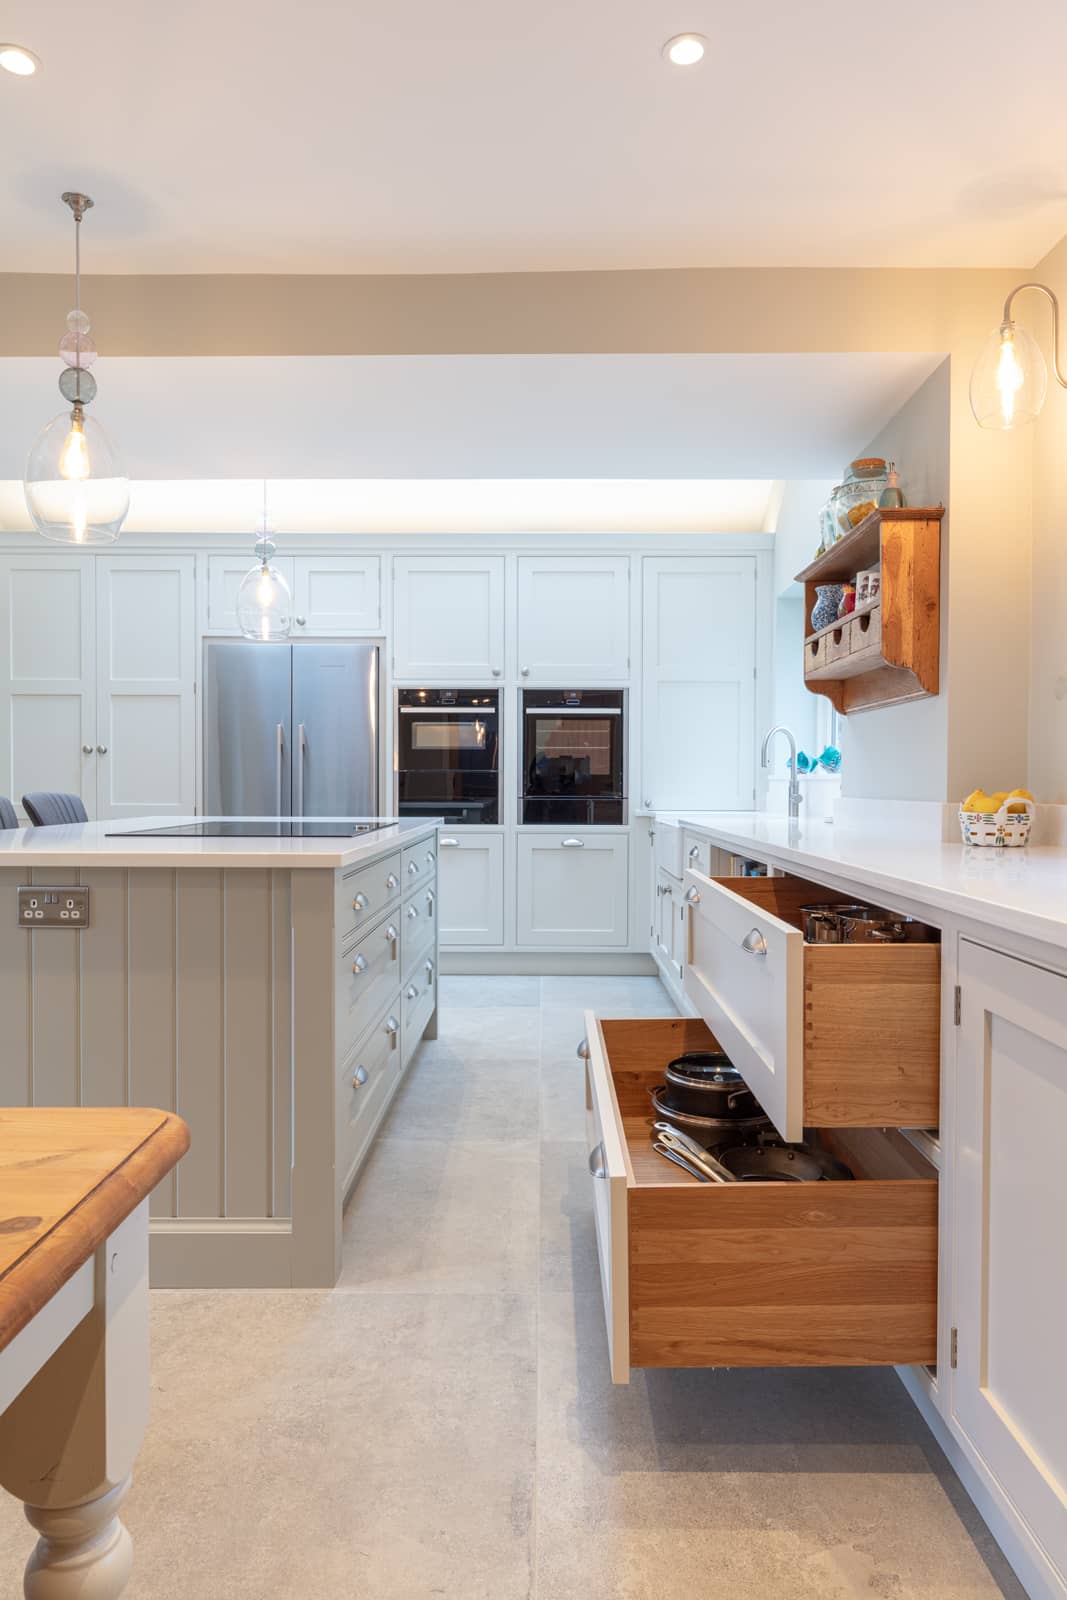 A white kitchen with wooden cabinets and drawers.